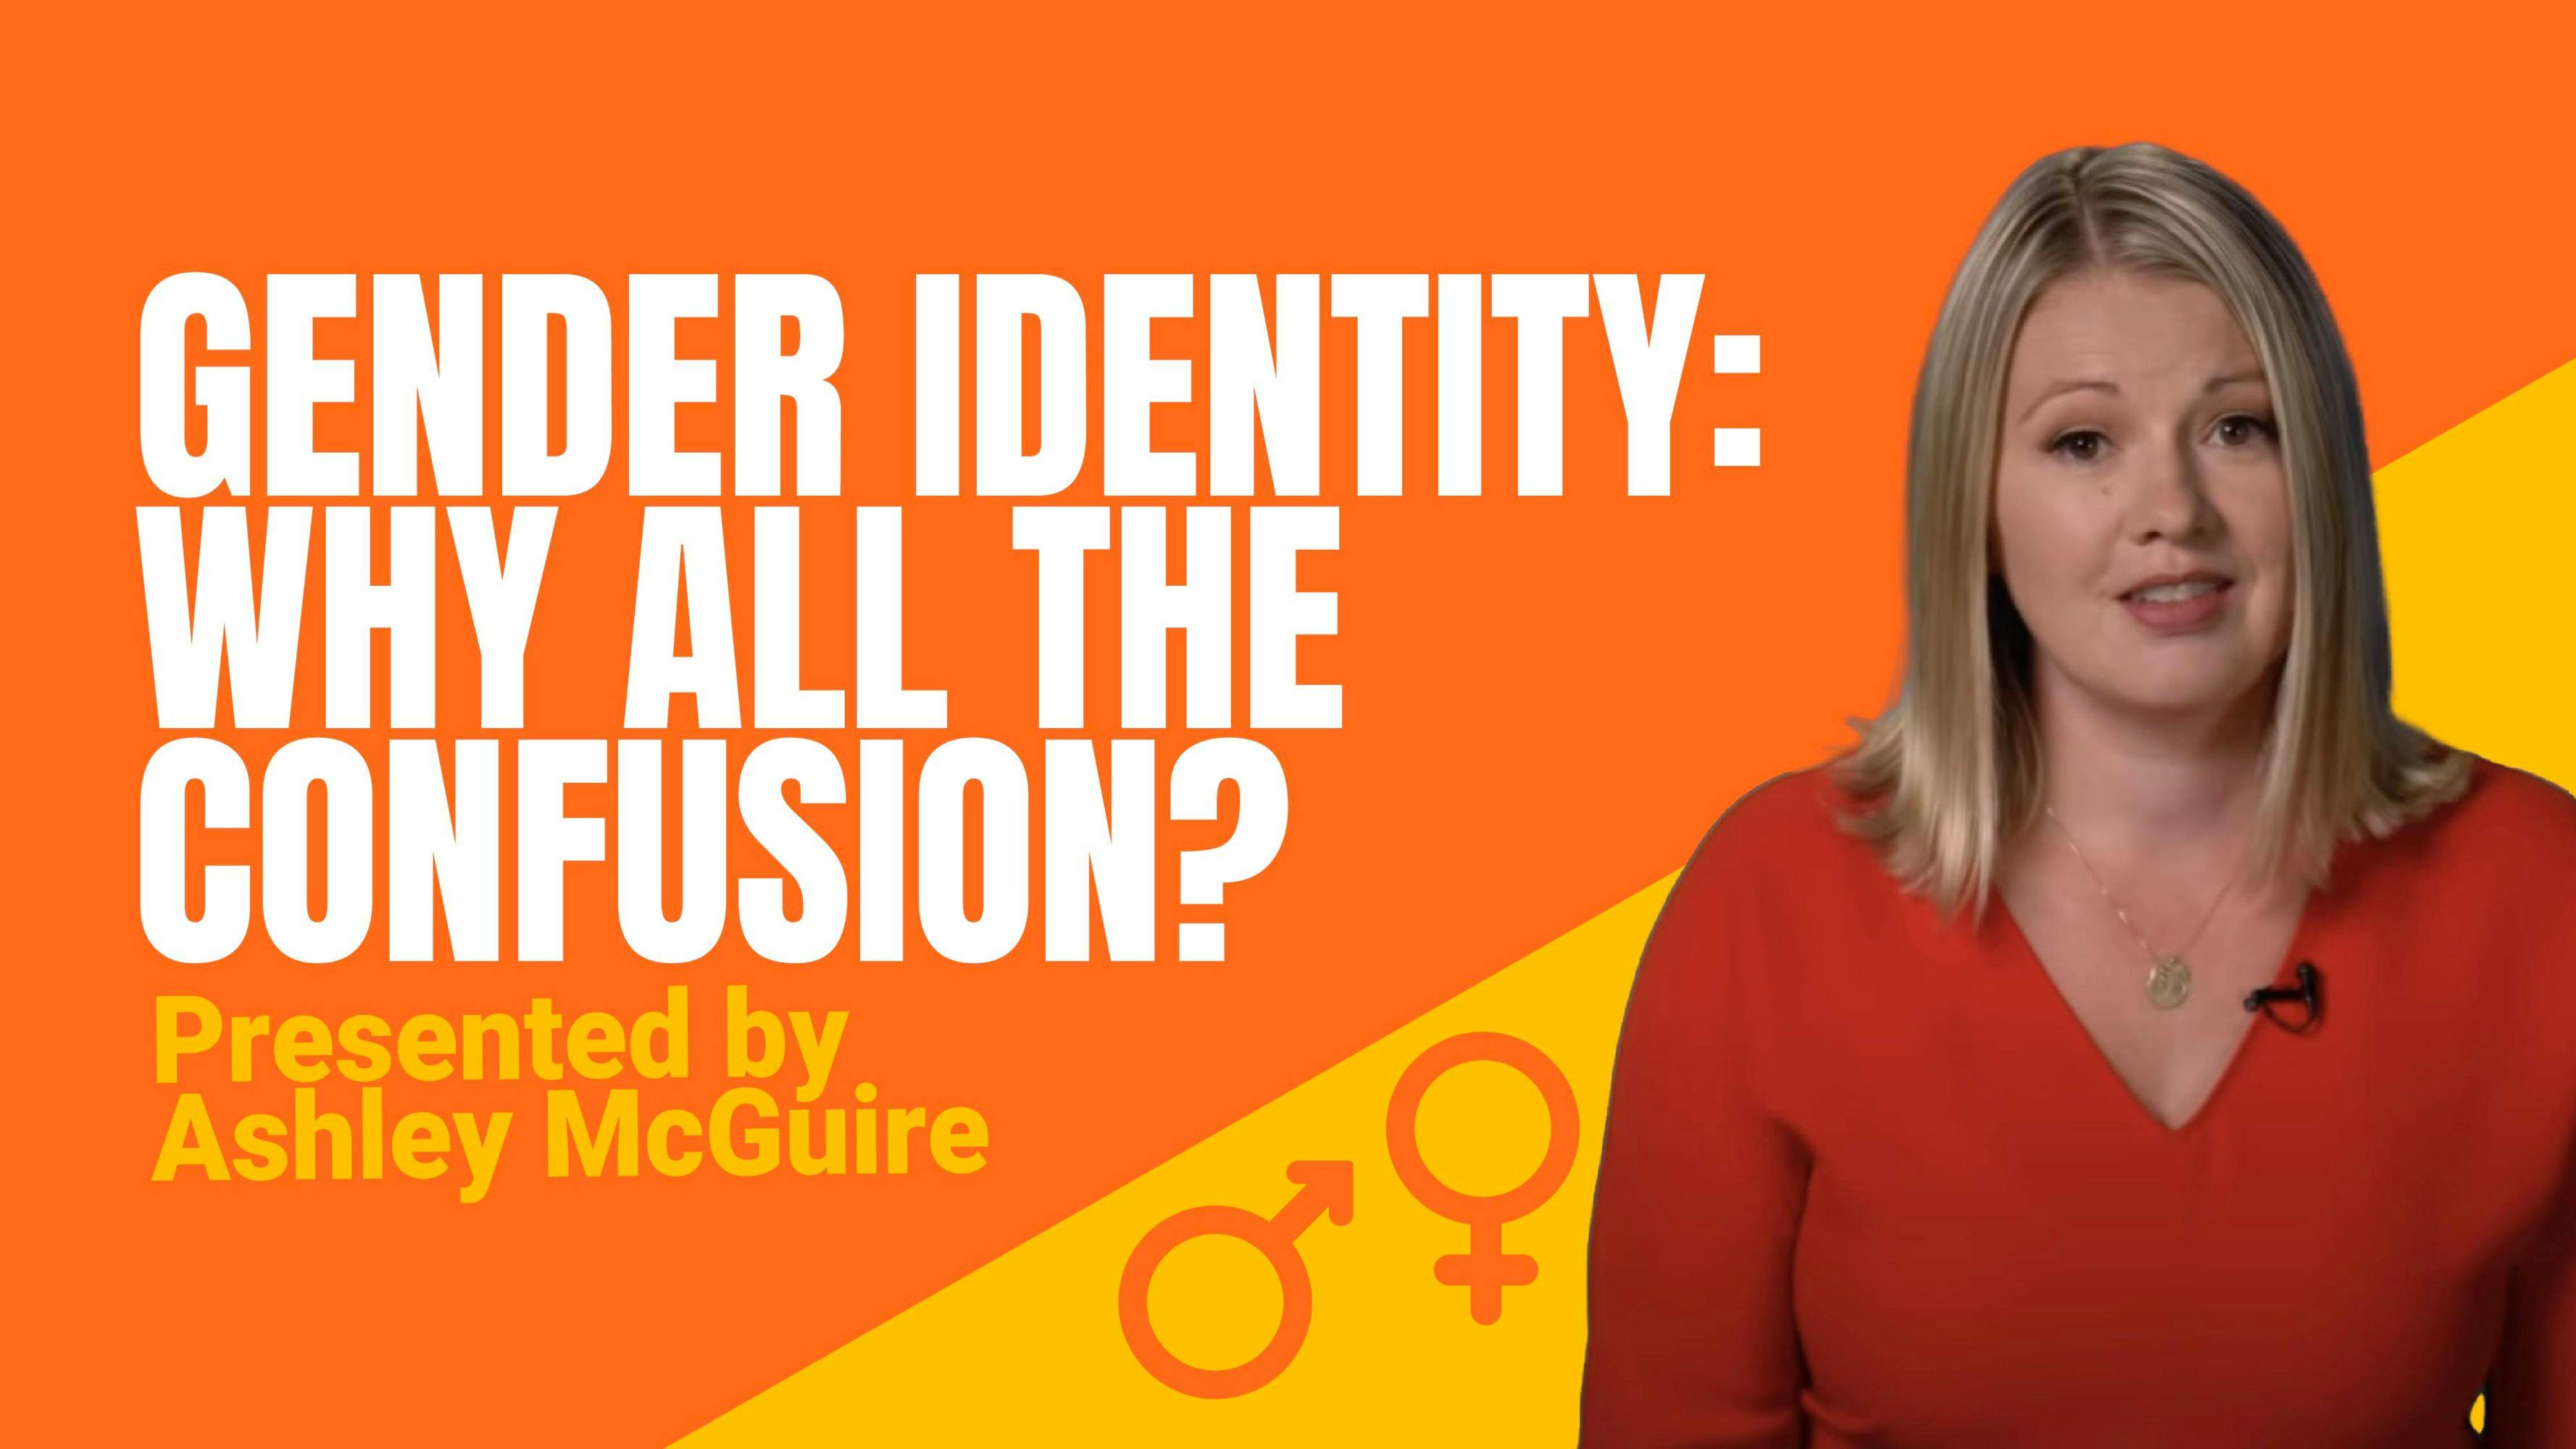 Gender Identity: Why All The Confusion?